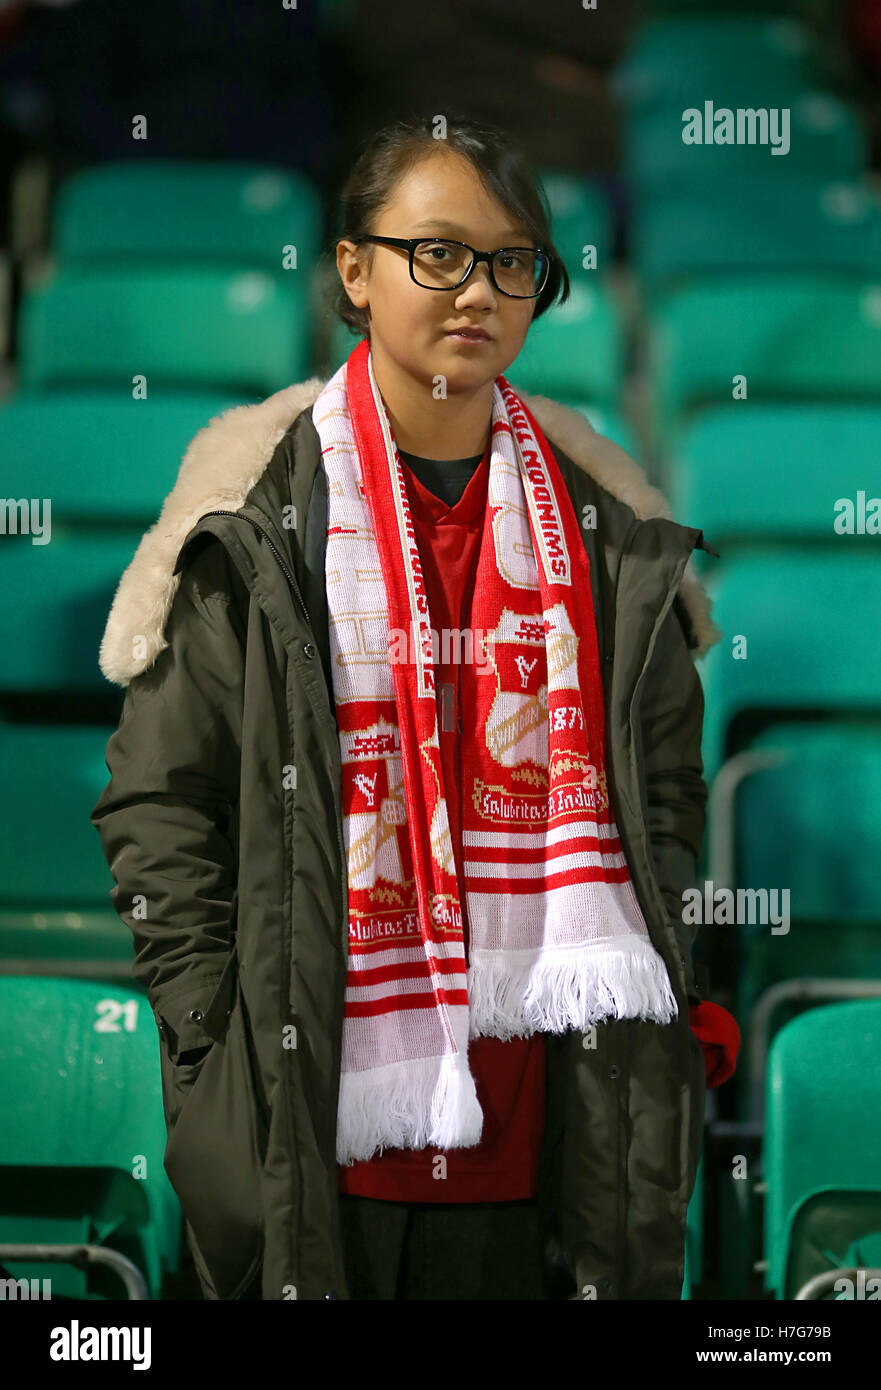 A Swindon Town fan in the stands prior to the Emirates FA Cup first round match at Silverlake Stadium, Eastleigh. Stock Photo